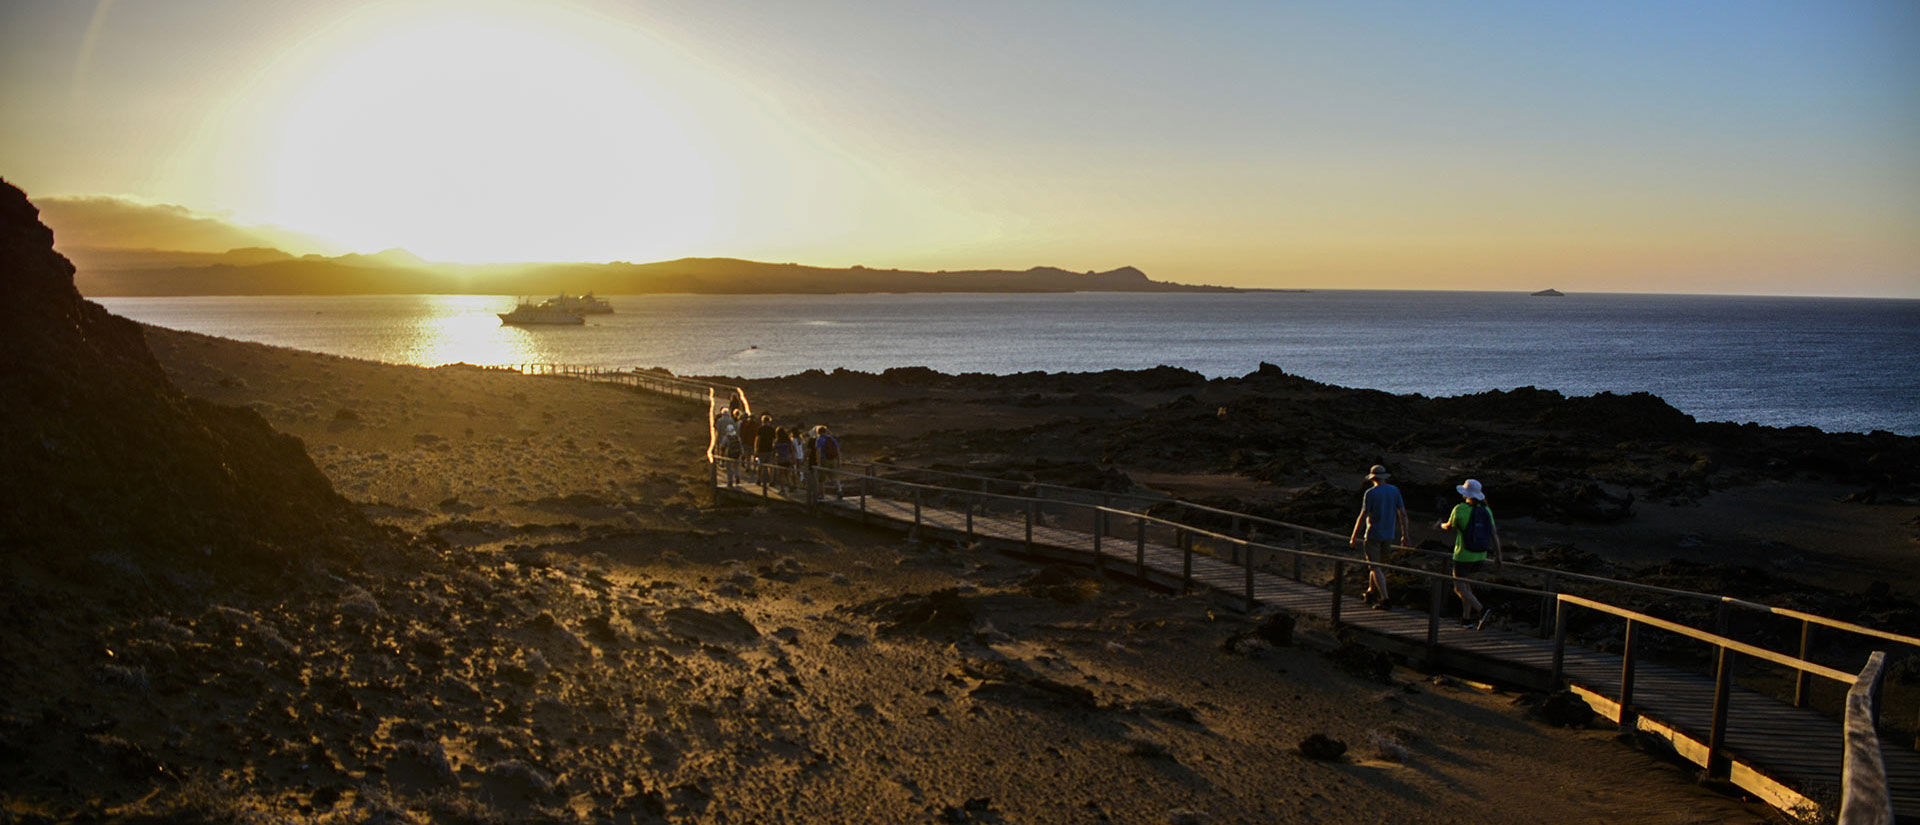 Sunset in Bartolome Island at the Galapagos Islands